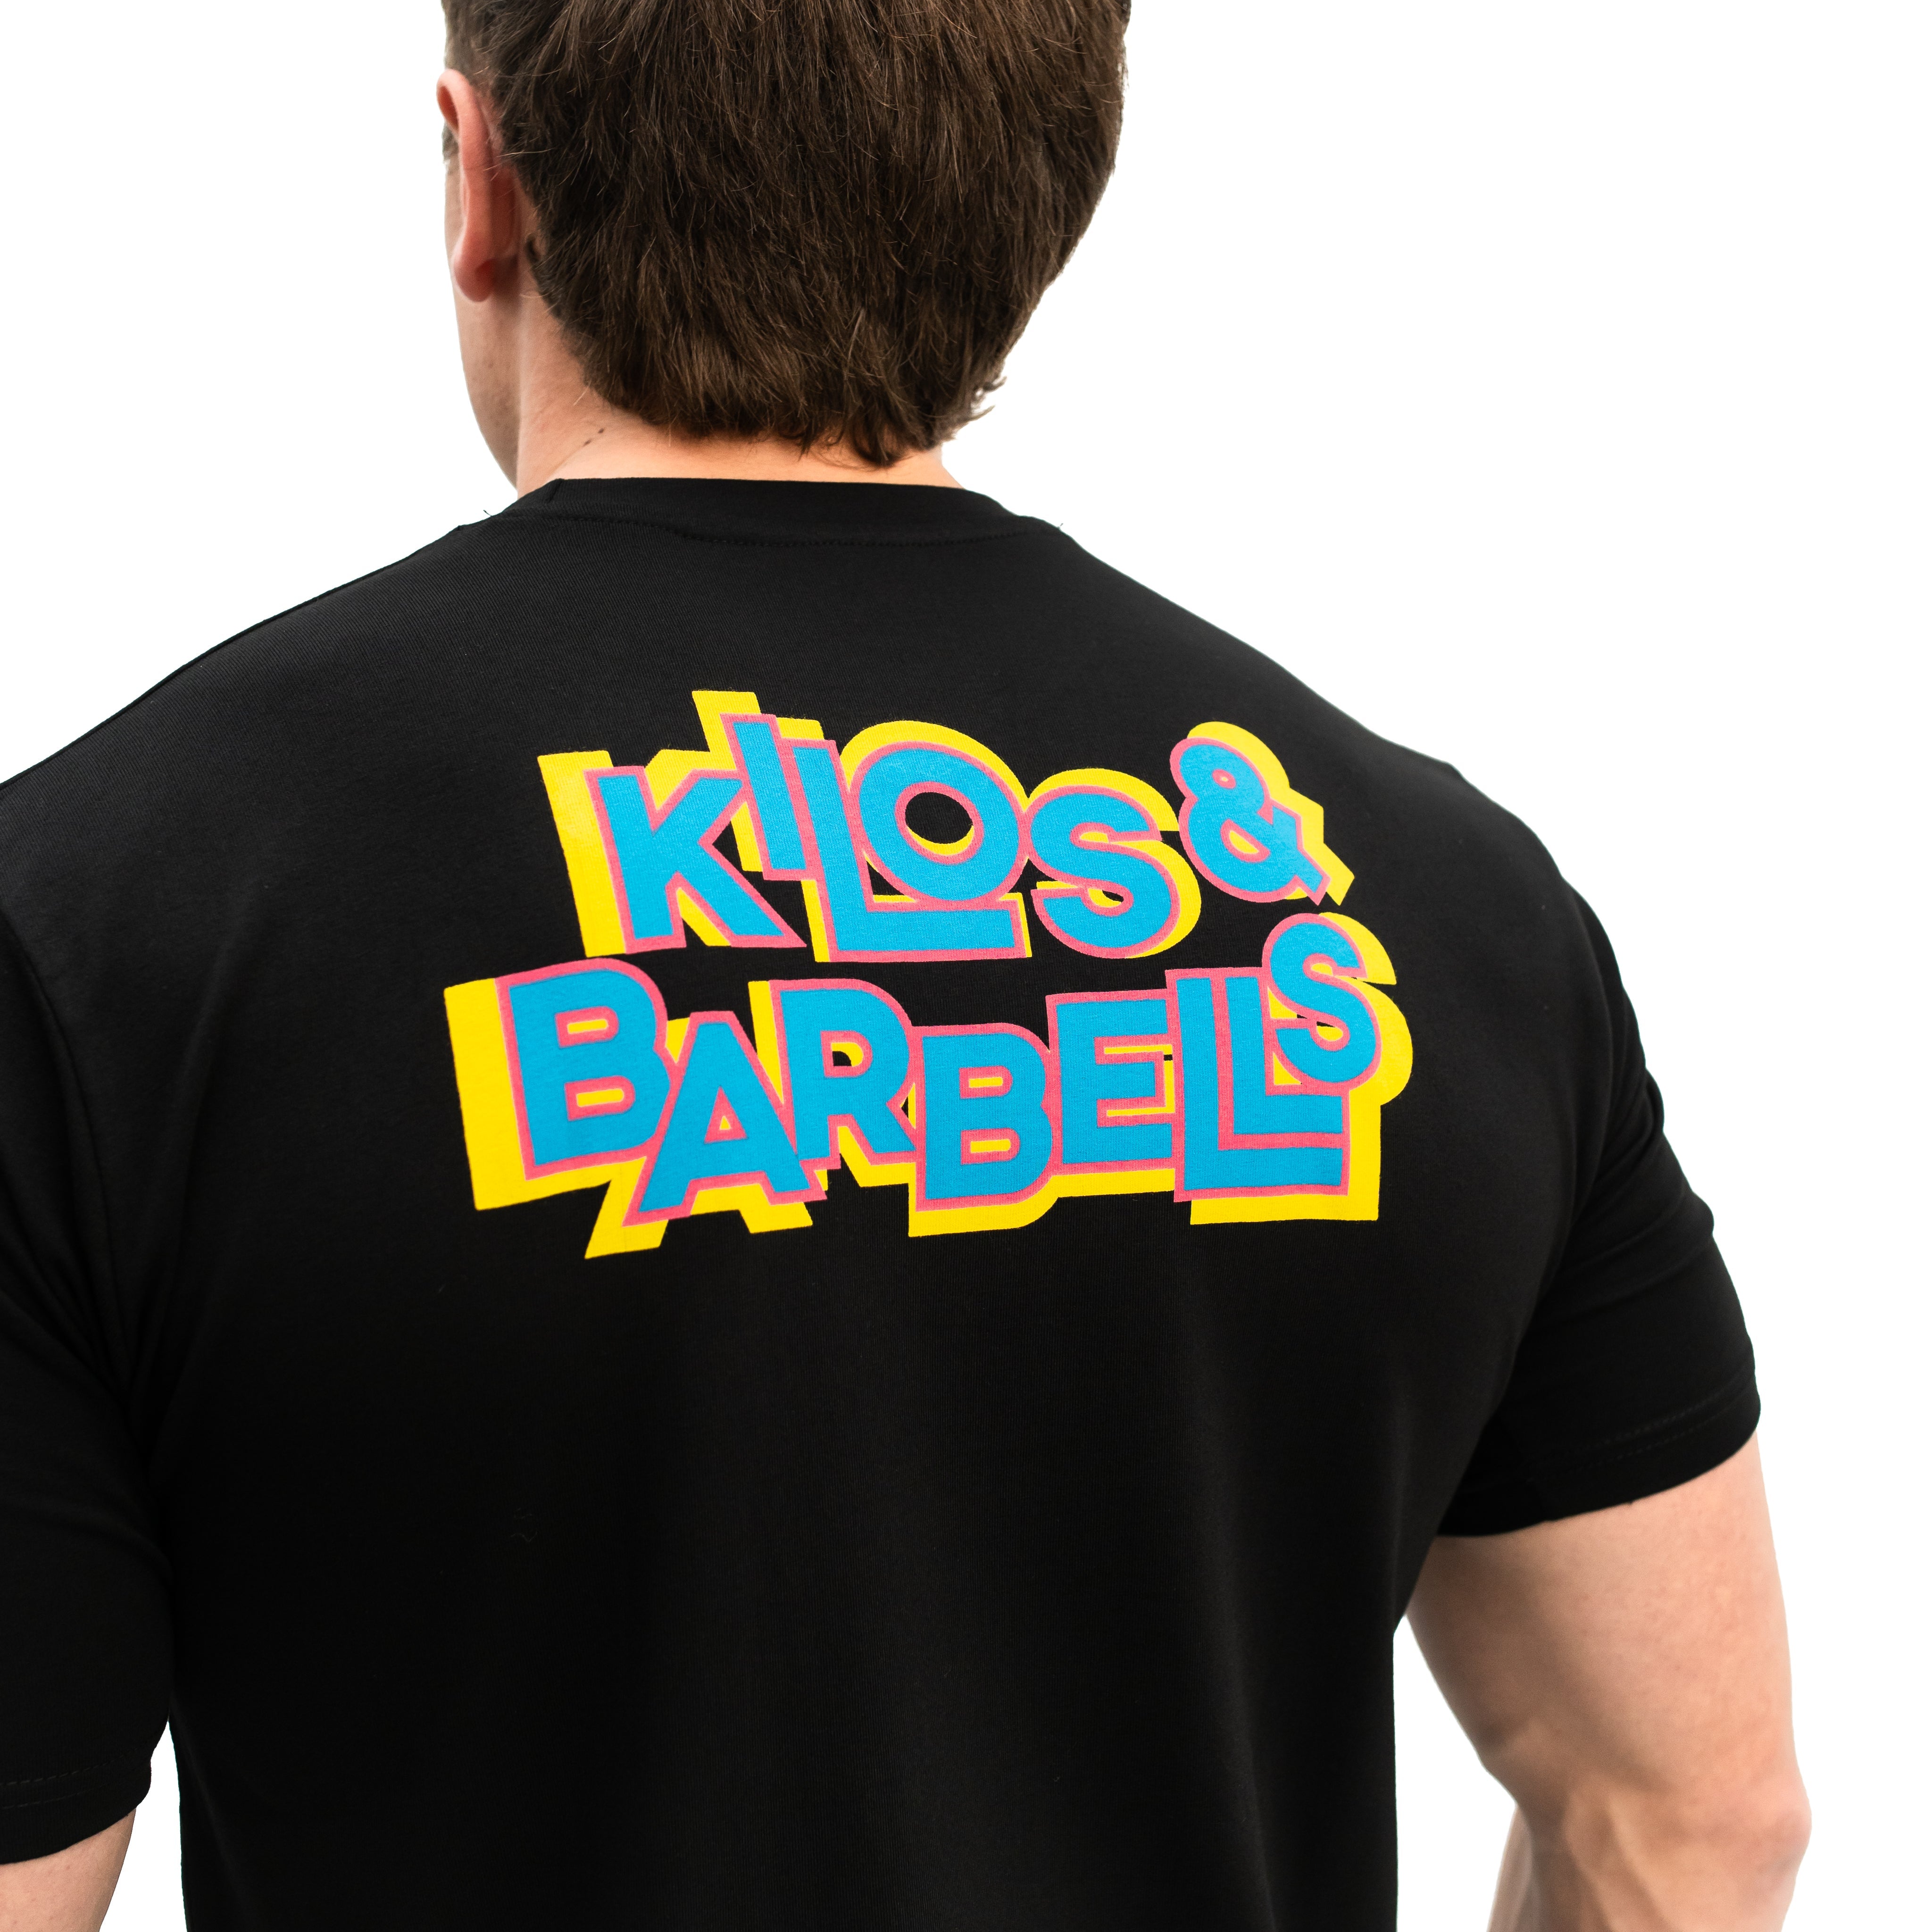 Kilos and Barbells Overtone Non Bar Grip Shirt combines the dark with the fun and colourful designs to bring that pop of colour into the daily workouts. The Kilos and Barbells Overtone Shirt is great for powerlifters. Purchase Kilos and Barbells Overtone shirt from A7 UK and A7 Europe. Kilos and Barbells Shirt is great for both in and out the gym. A7UK has the best Powerlifting apparel for all your workouts. Available in UK and Europe including France, Italy, Germany, the Netherlands, Sweden and Poland.